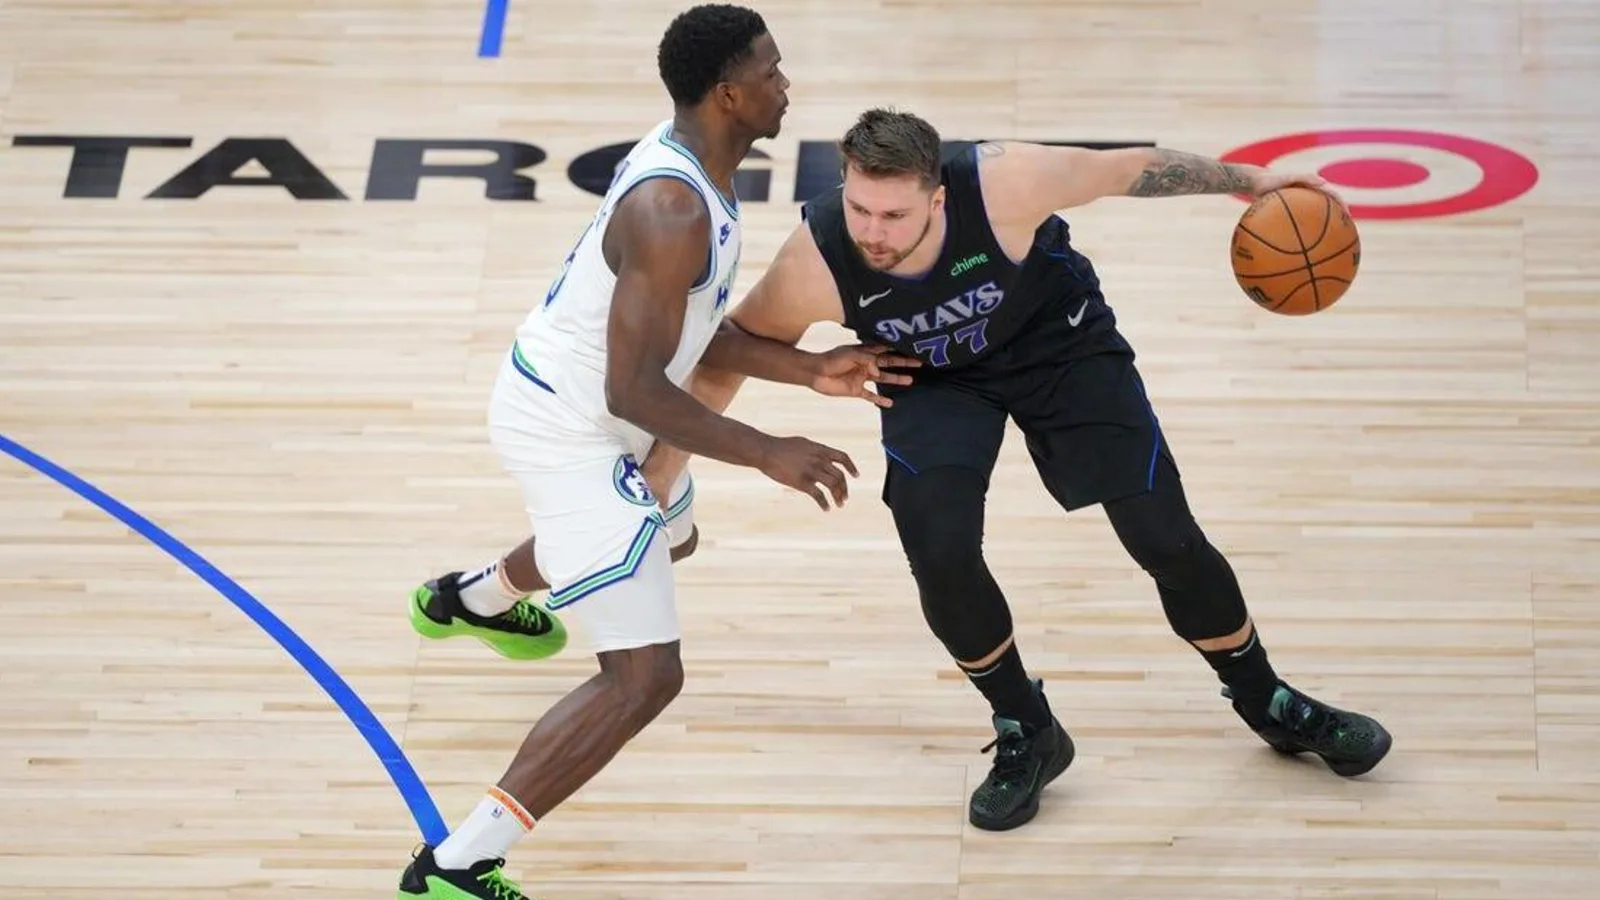 Dallas Mavericks Dissidents Star Luka Dončić Gets Everyone’s Attention With Opponents LeBron James With Game-Dominating Shot in NBA Finals